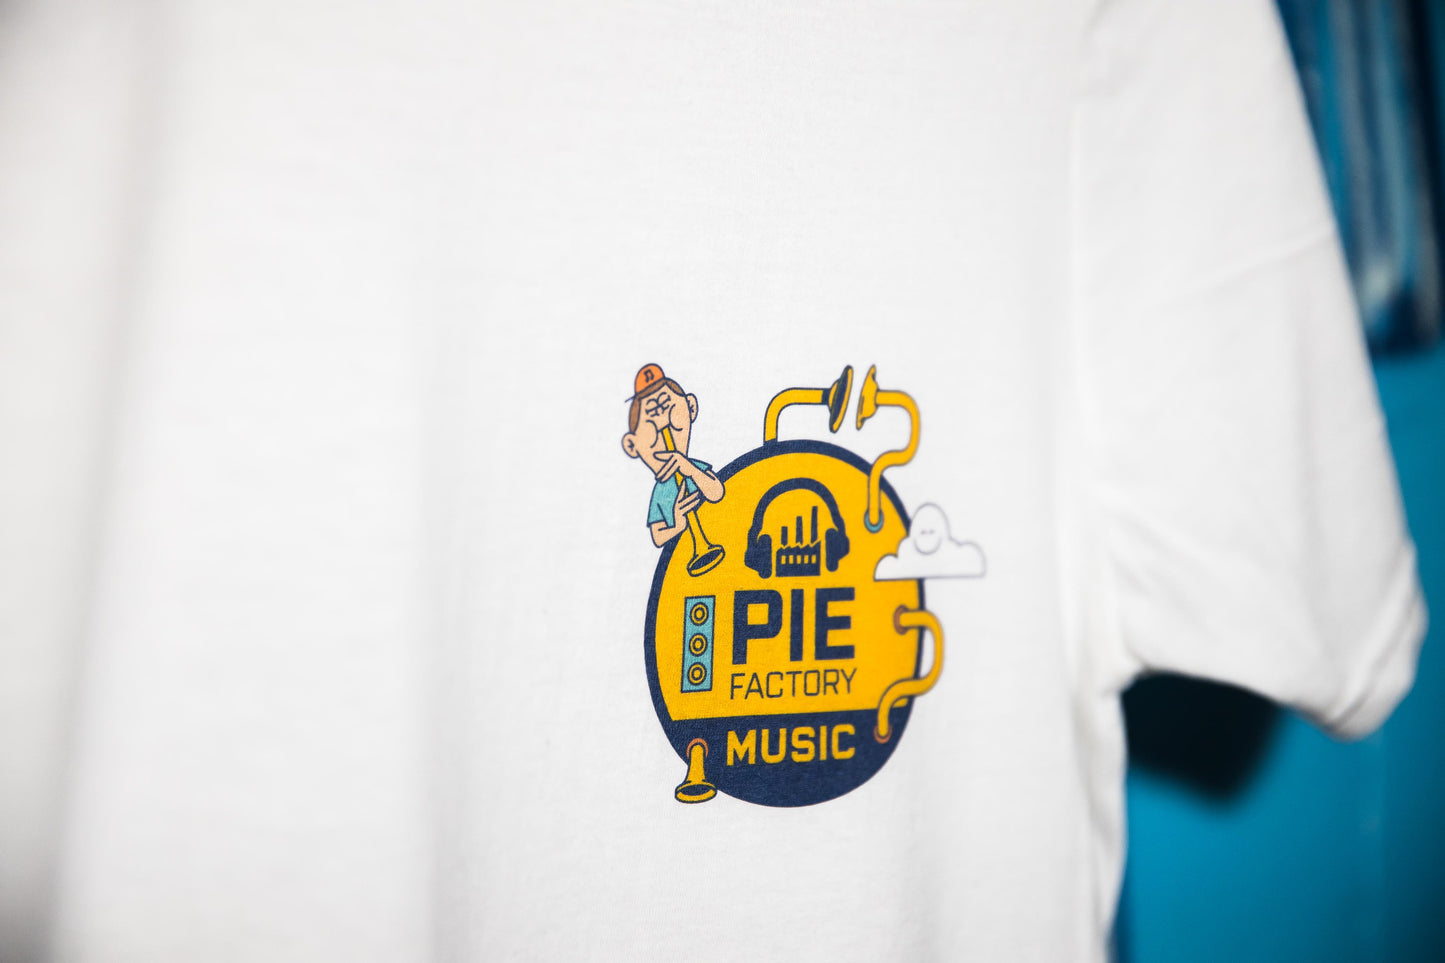 Pie t-shirt designed by Rob Flowers